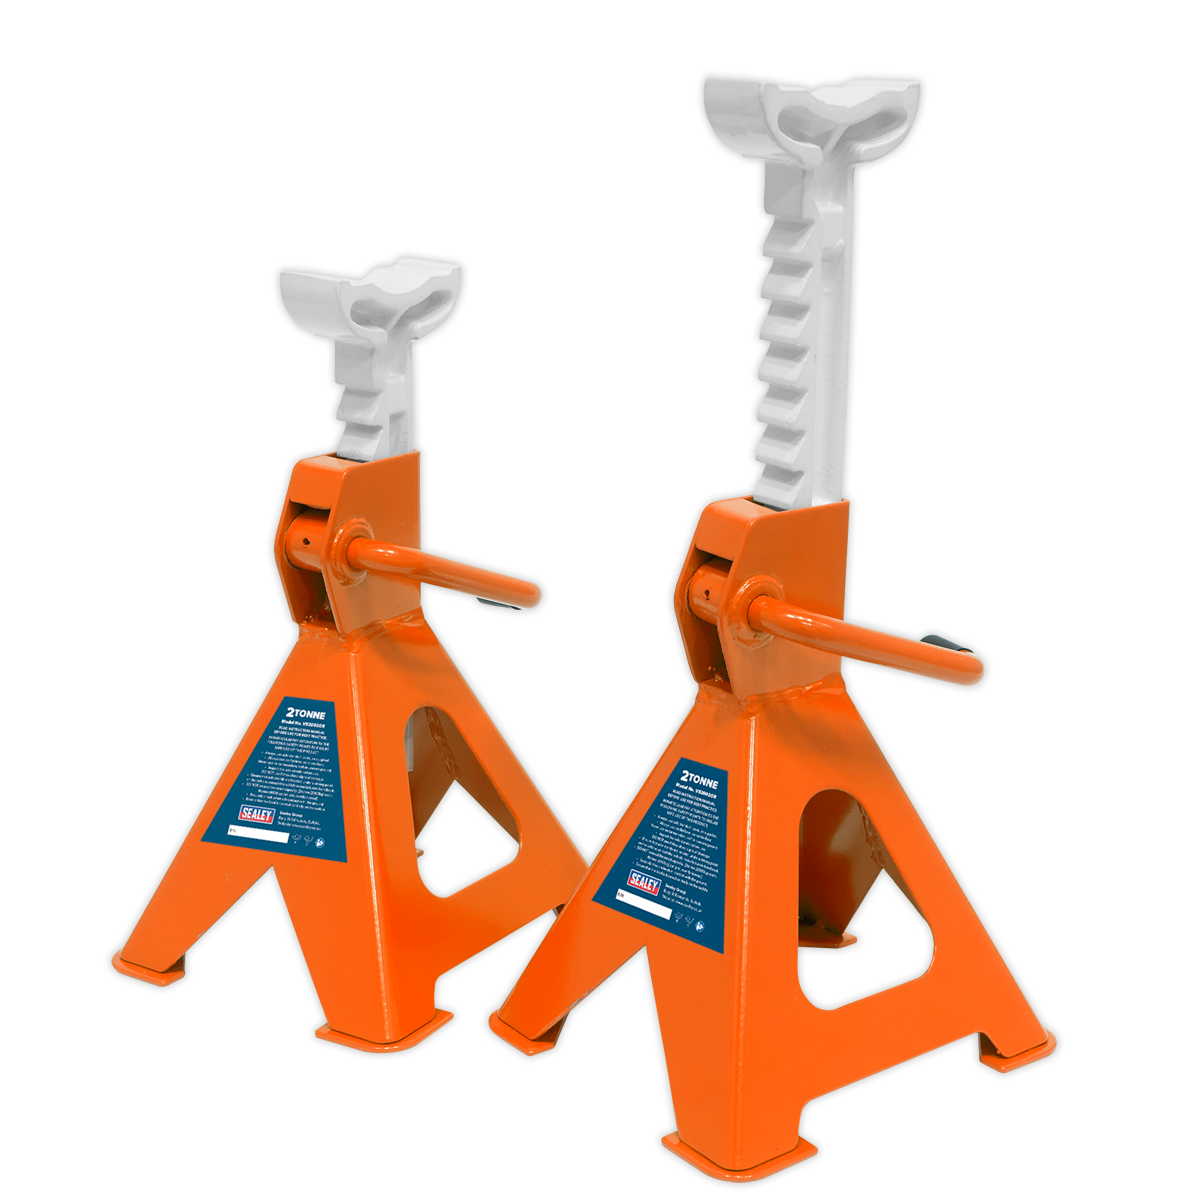 SEALEY - VS2002OR Axle Stands (Pair) 2tonne Capacity per Stand Ratchet Type - Orange